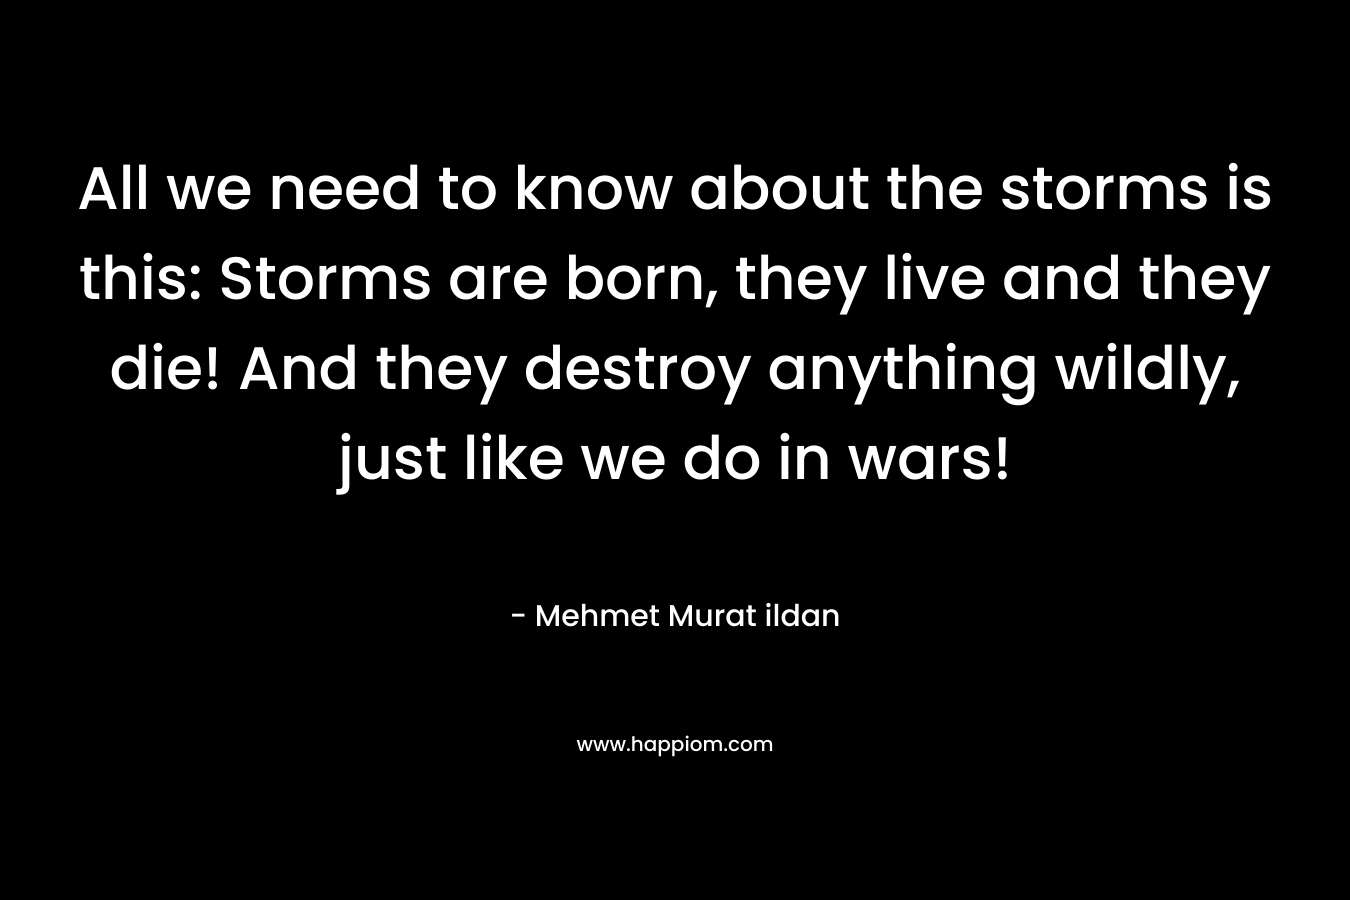 All we need to know about the storms is this: Storms are born, they live and they die! And they destroy anything wildly, just like we do in wars!